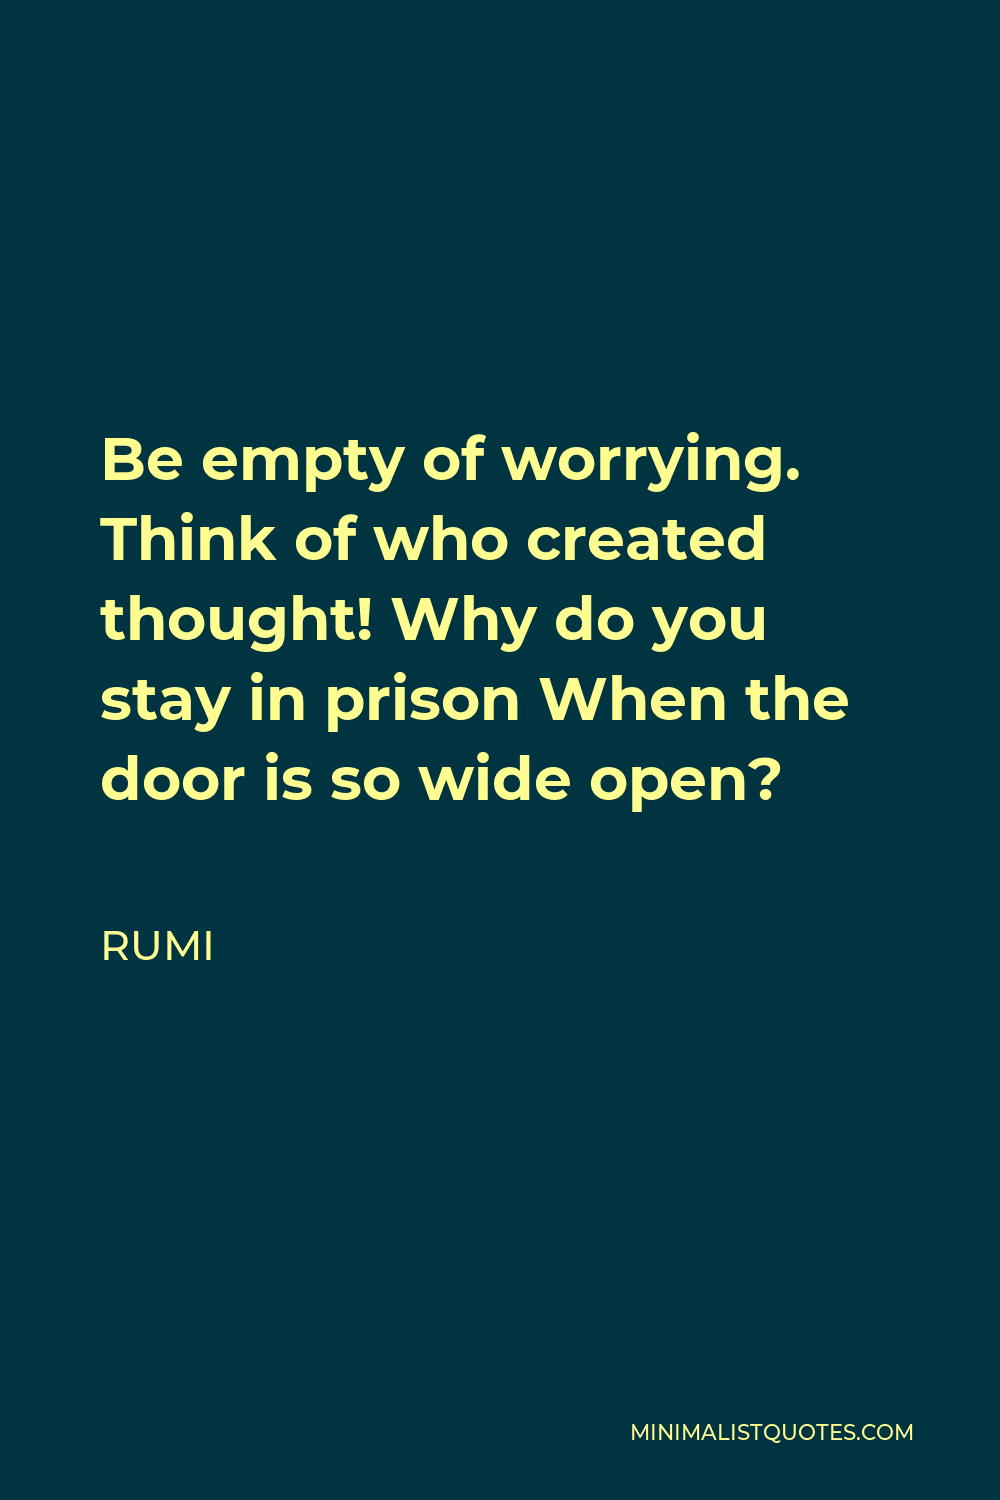 Rumi Quote - Be empty of worrying. Think of who created thought! Why do you stay in prison When the door is so wide open?